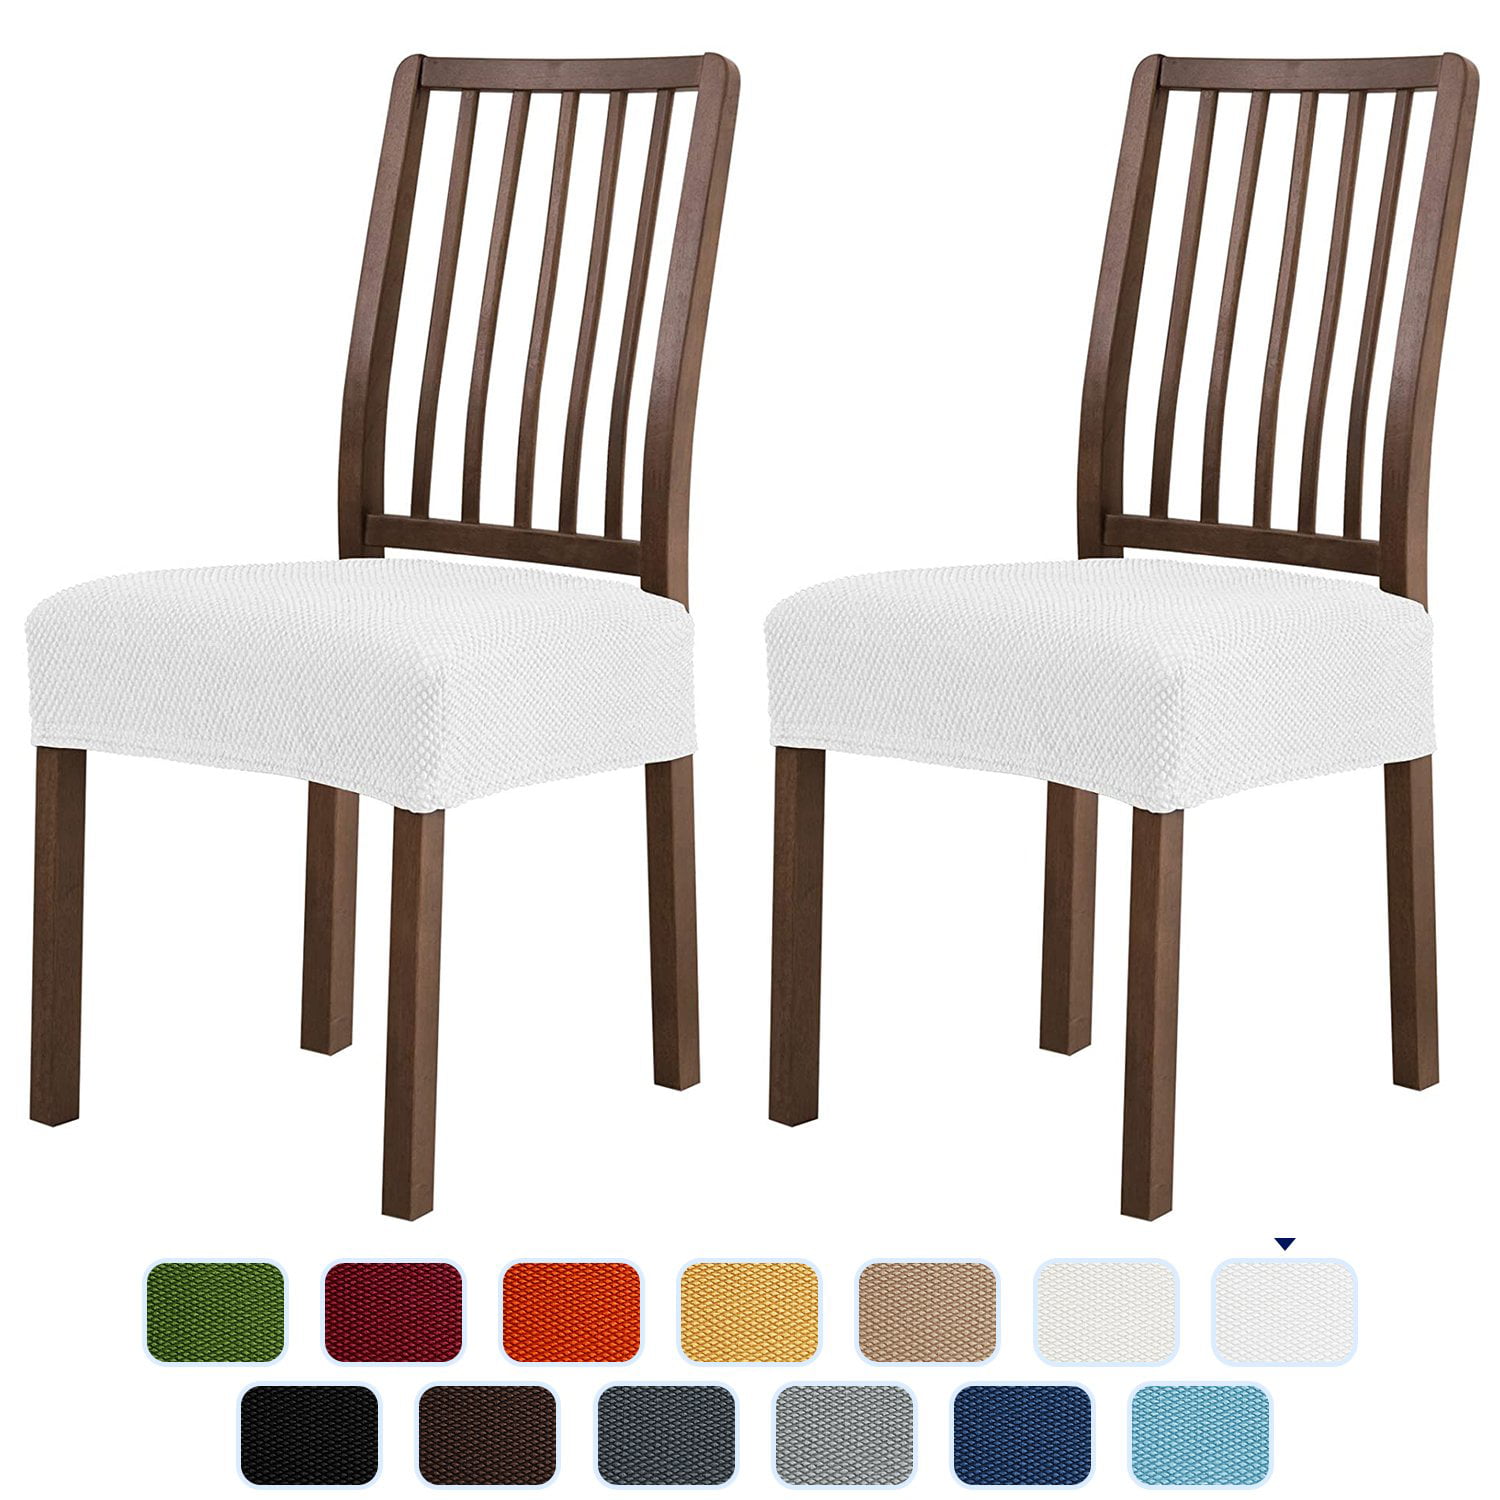 2x Removable Stretch Dining Chair Protect Seat Cover Cushion Wedding Venue Decor 